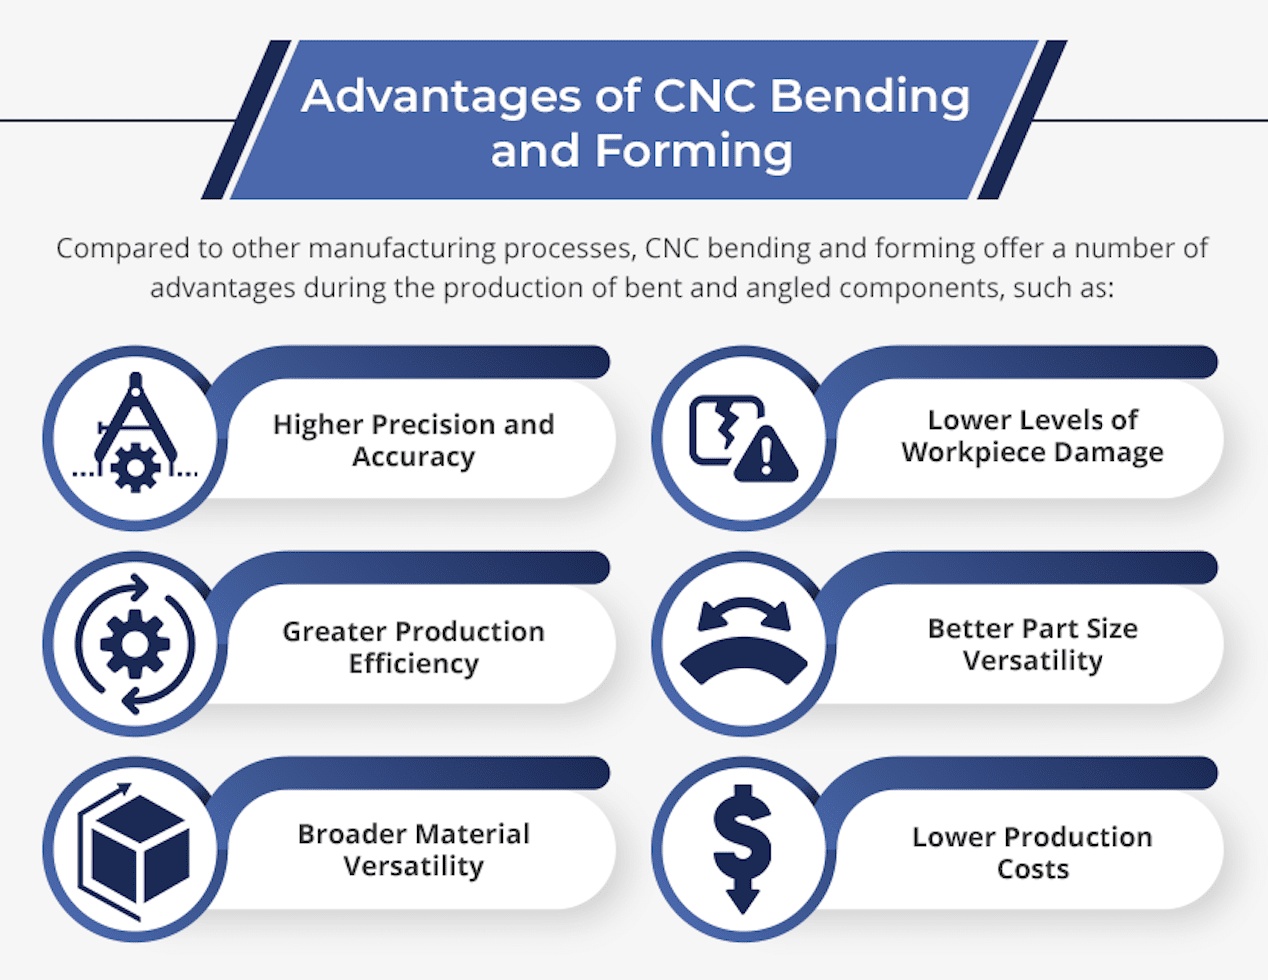 Advantages of CNC Bending and Forming